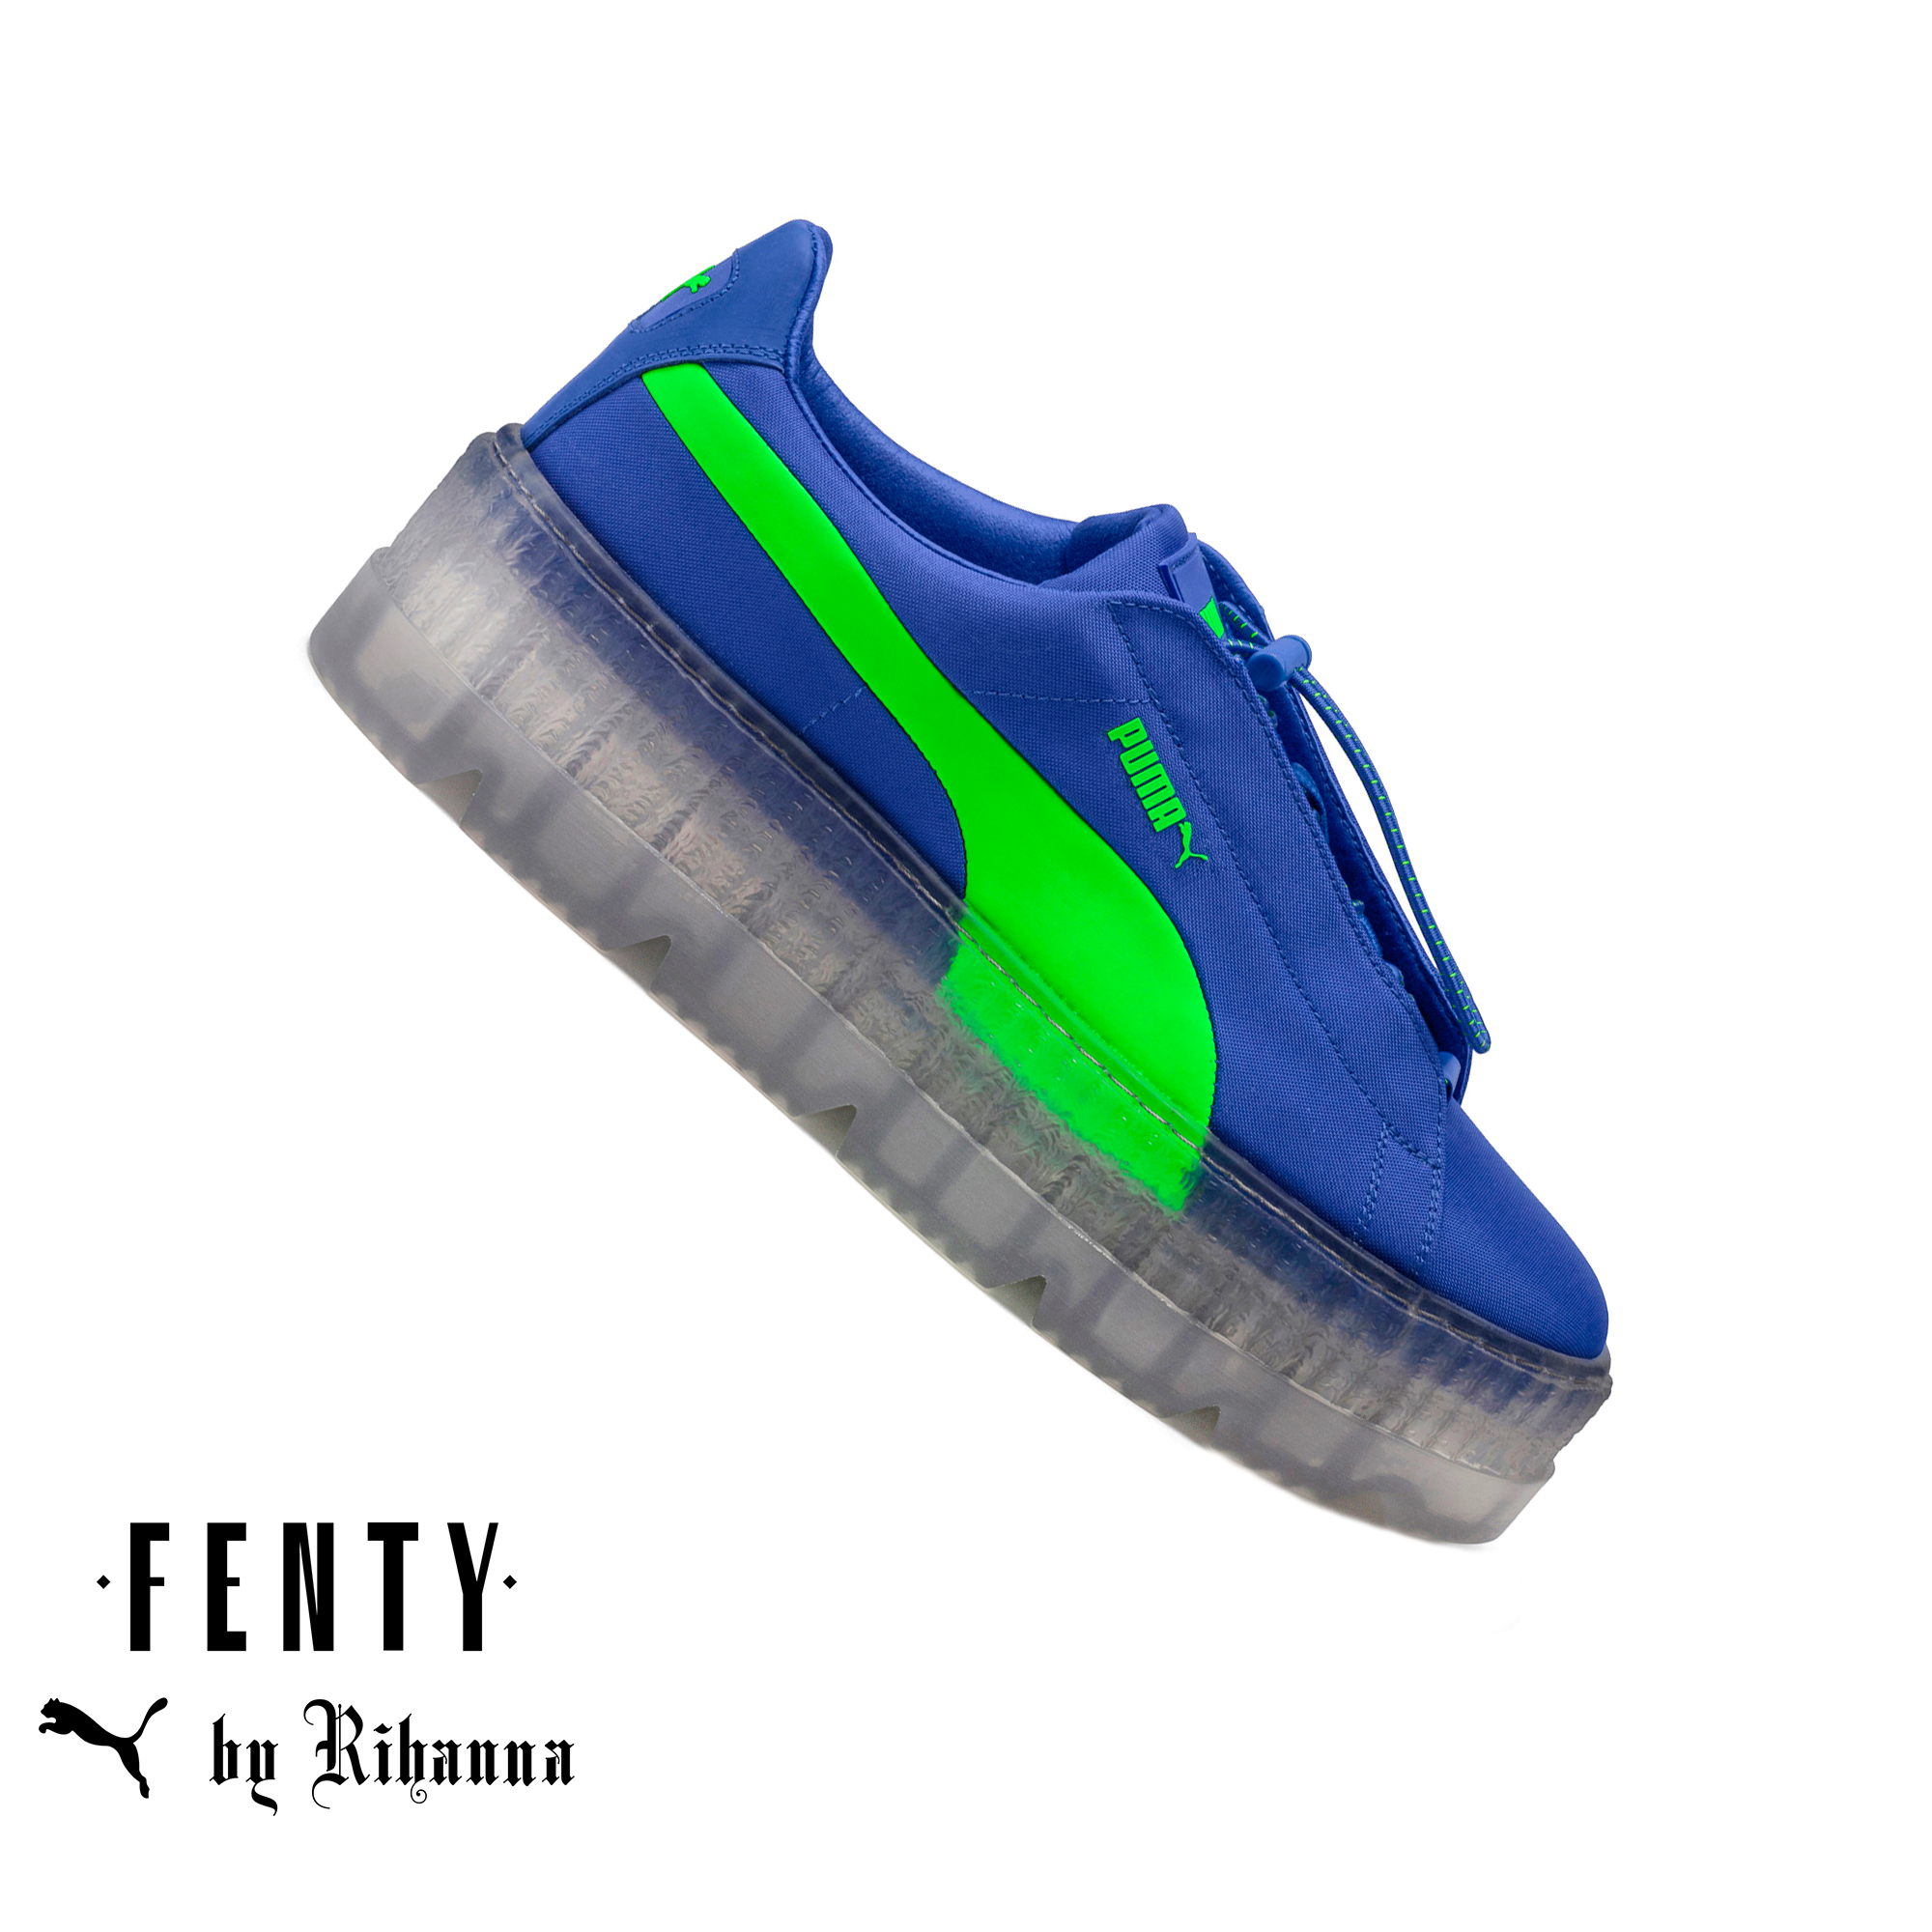 pumas #clear #blue #green #shoes #lovethis